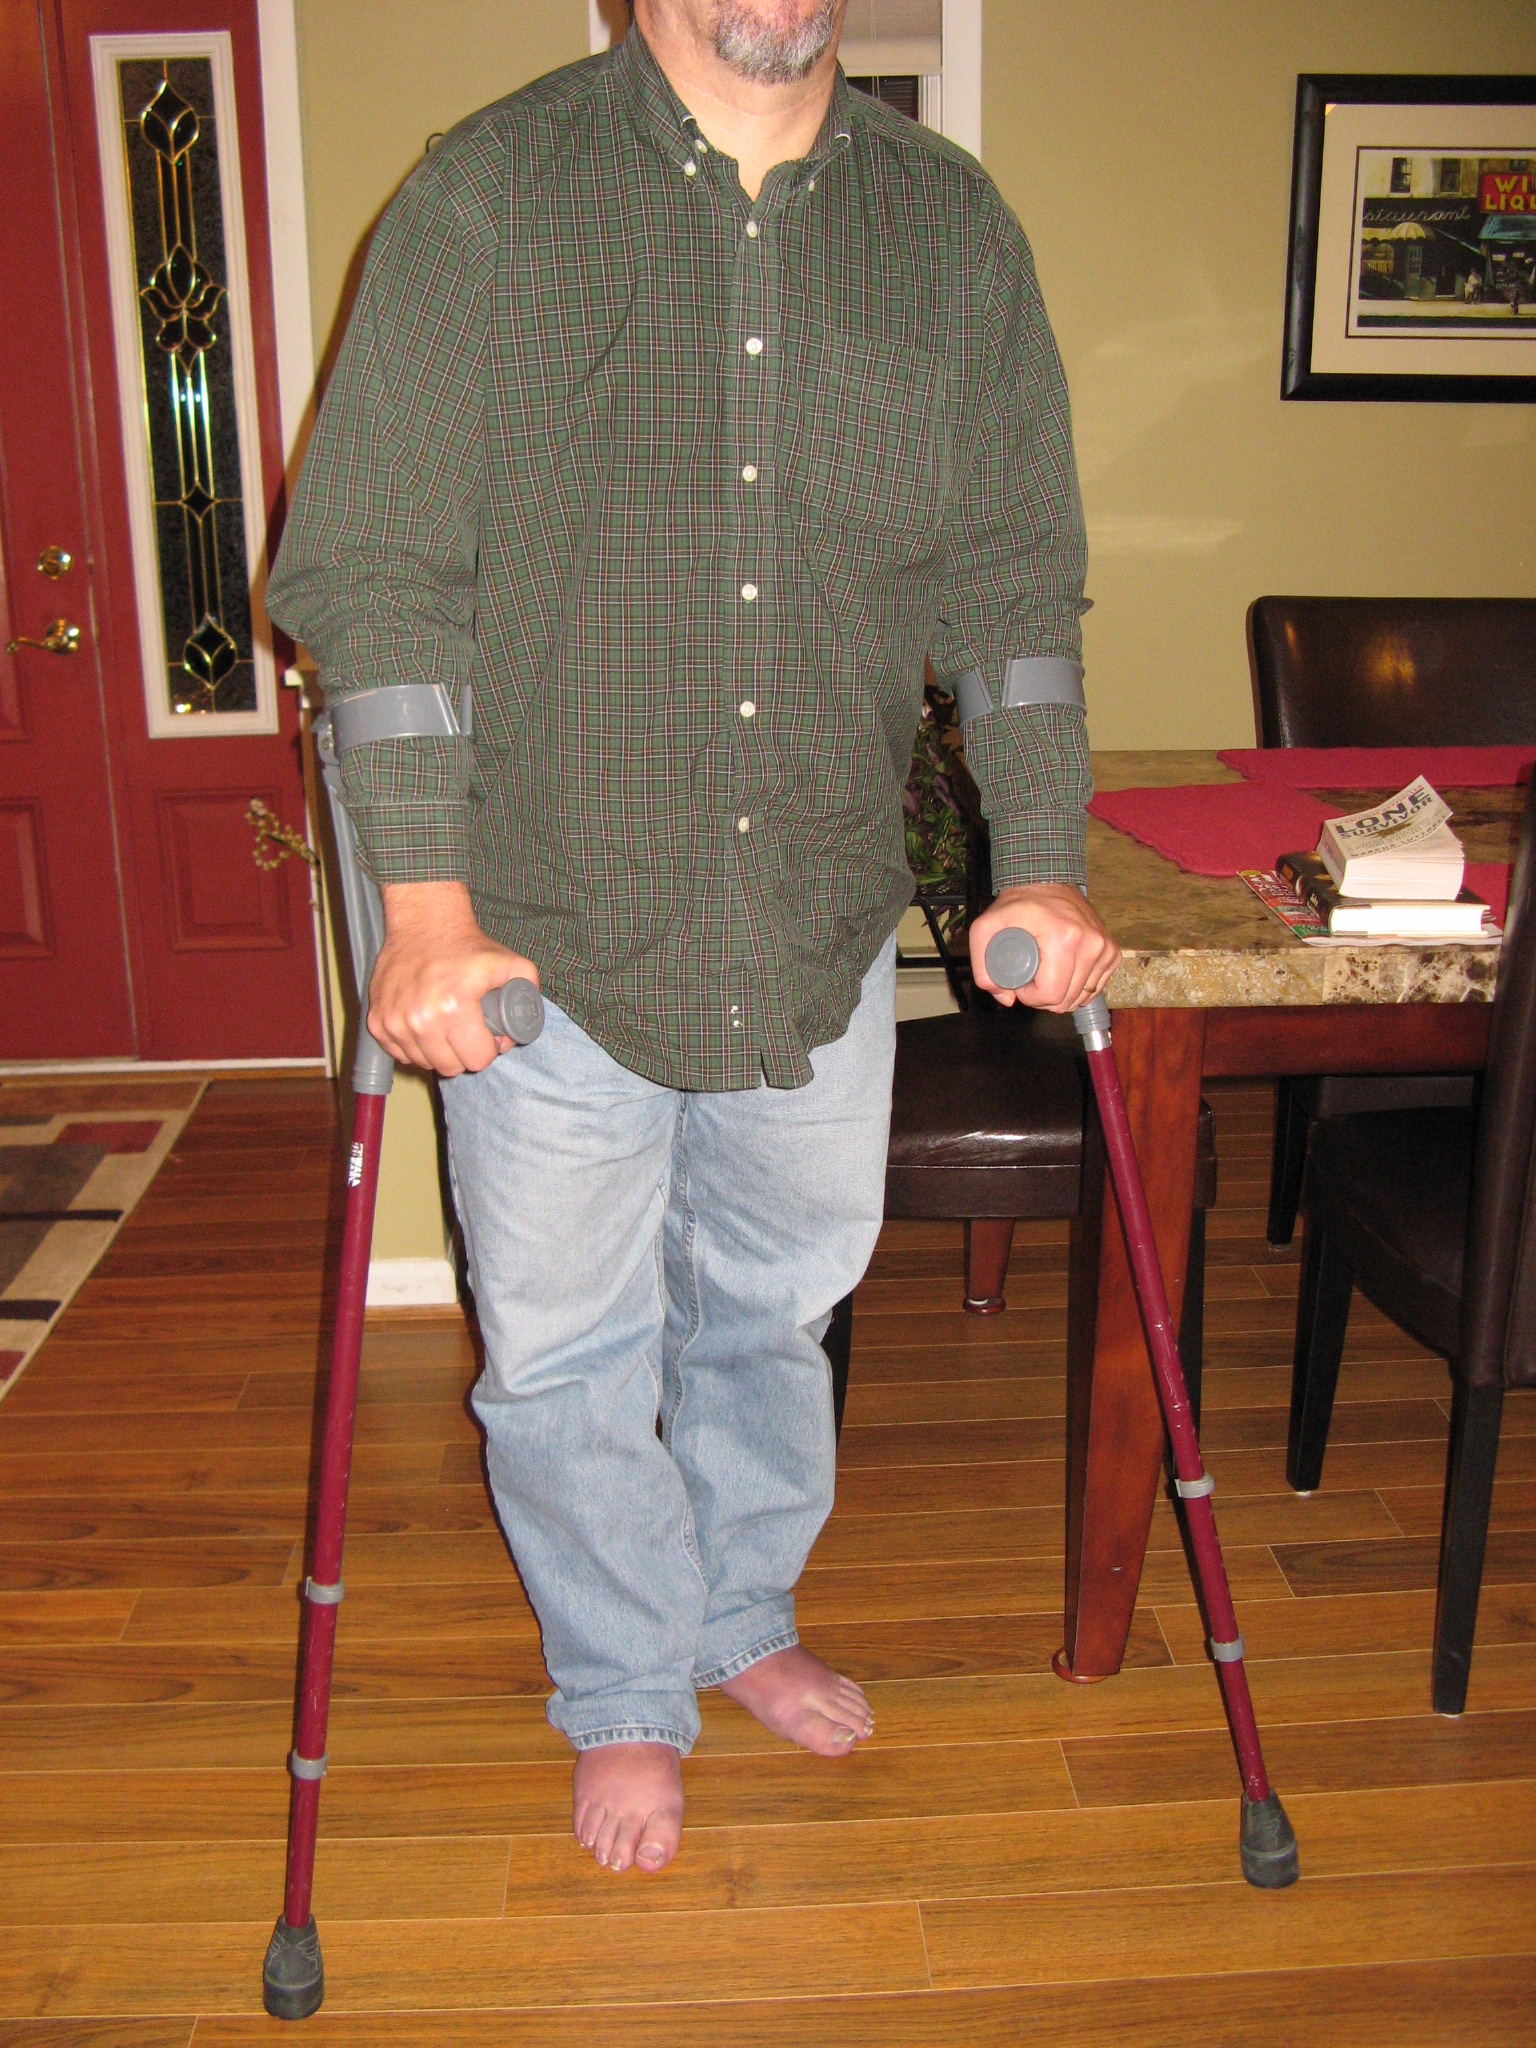 Mitch standing with his forearm crutches